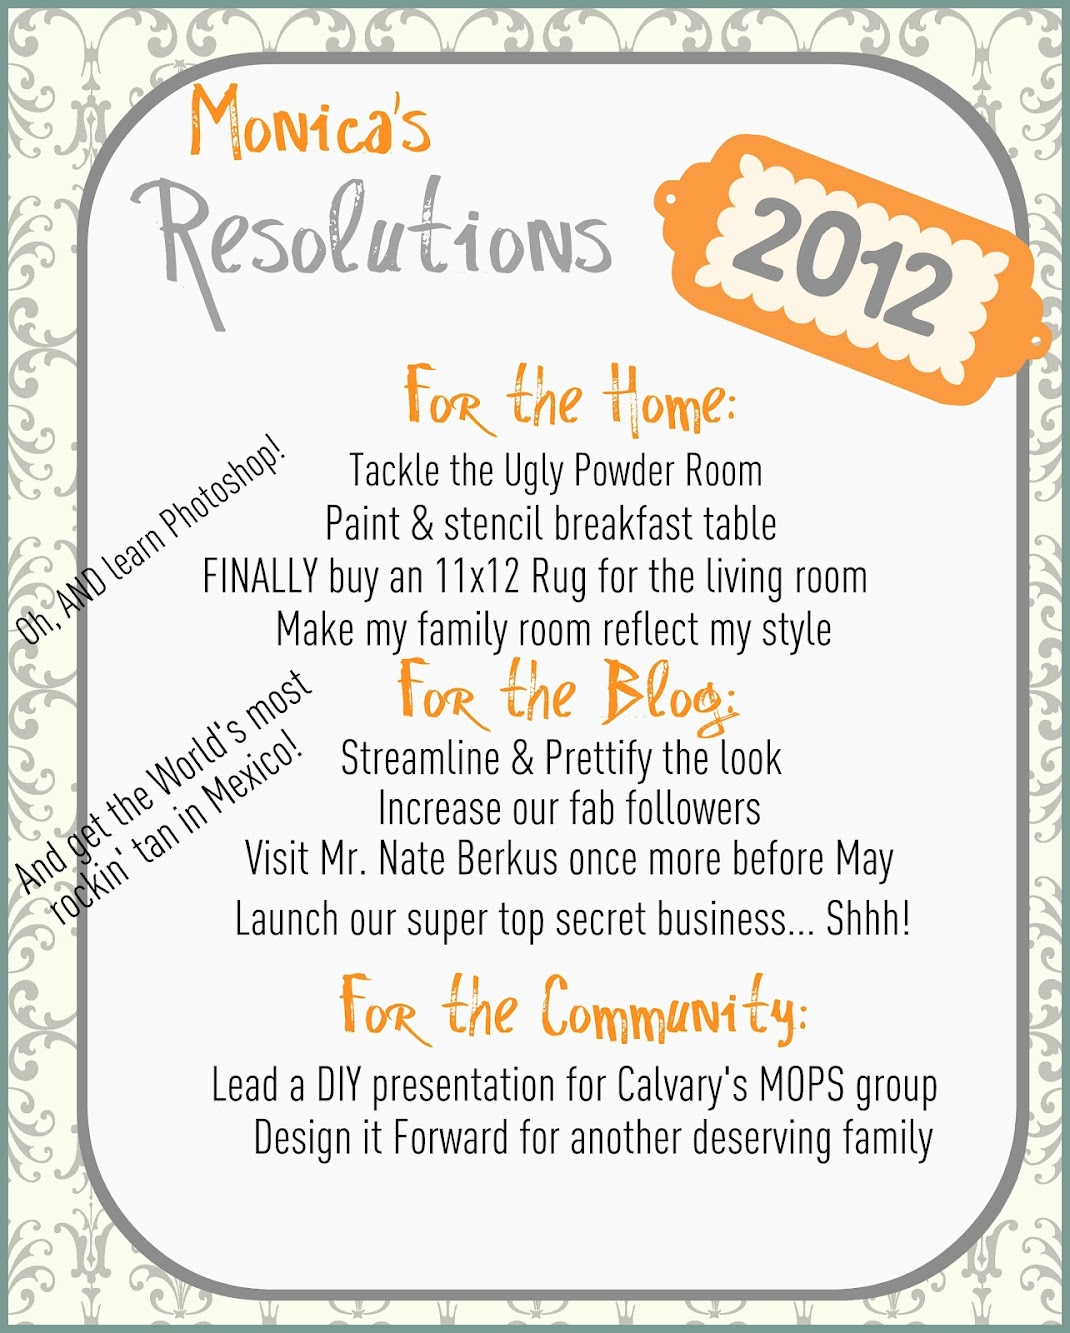 Watch out 2012… We've got BIG plans for you!